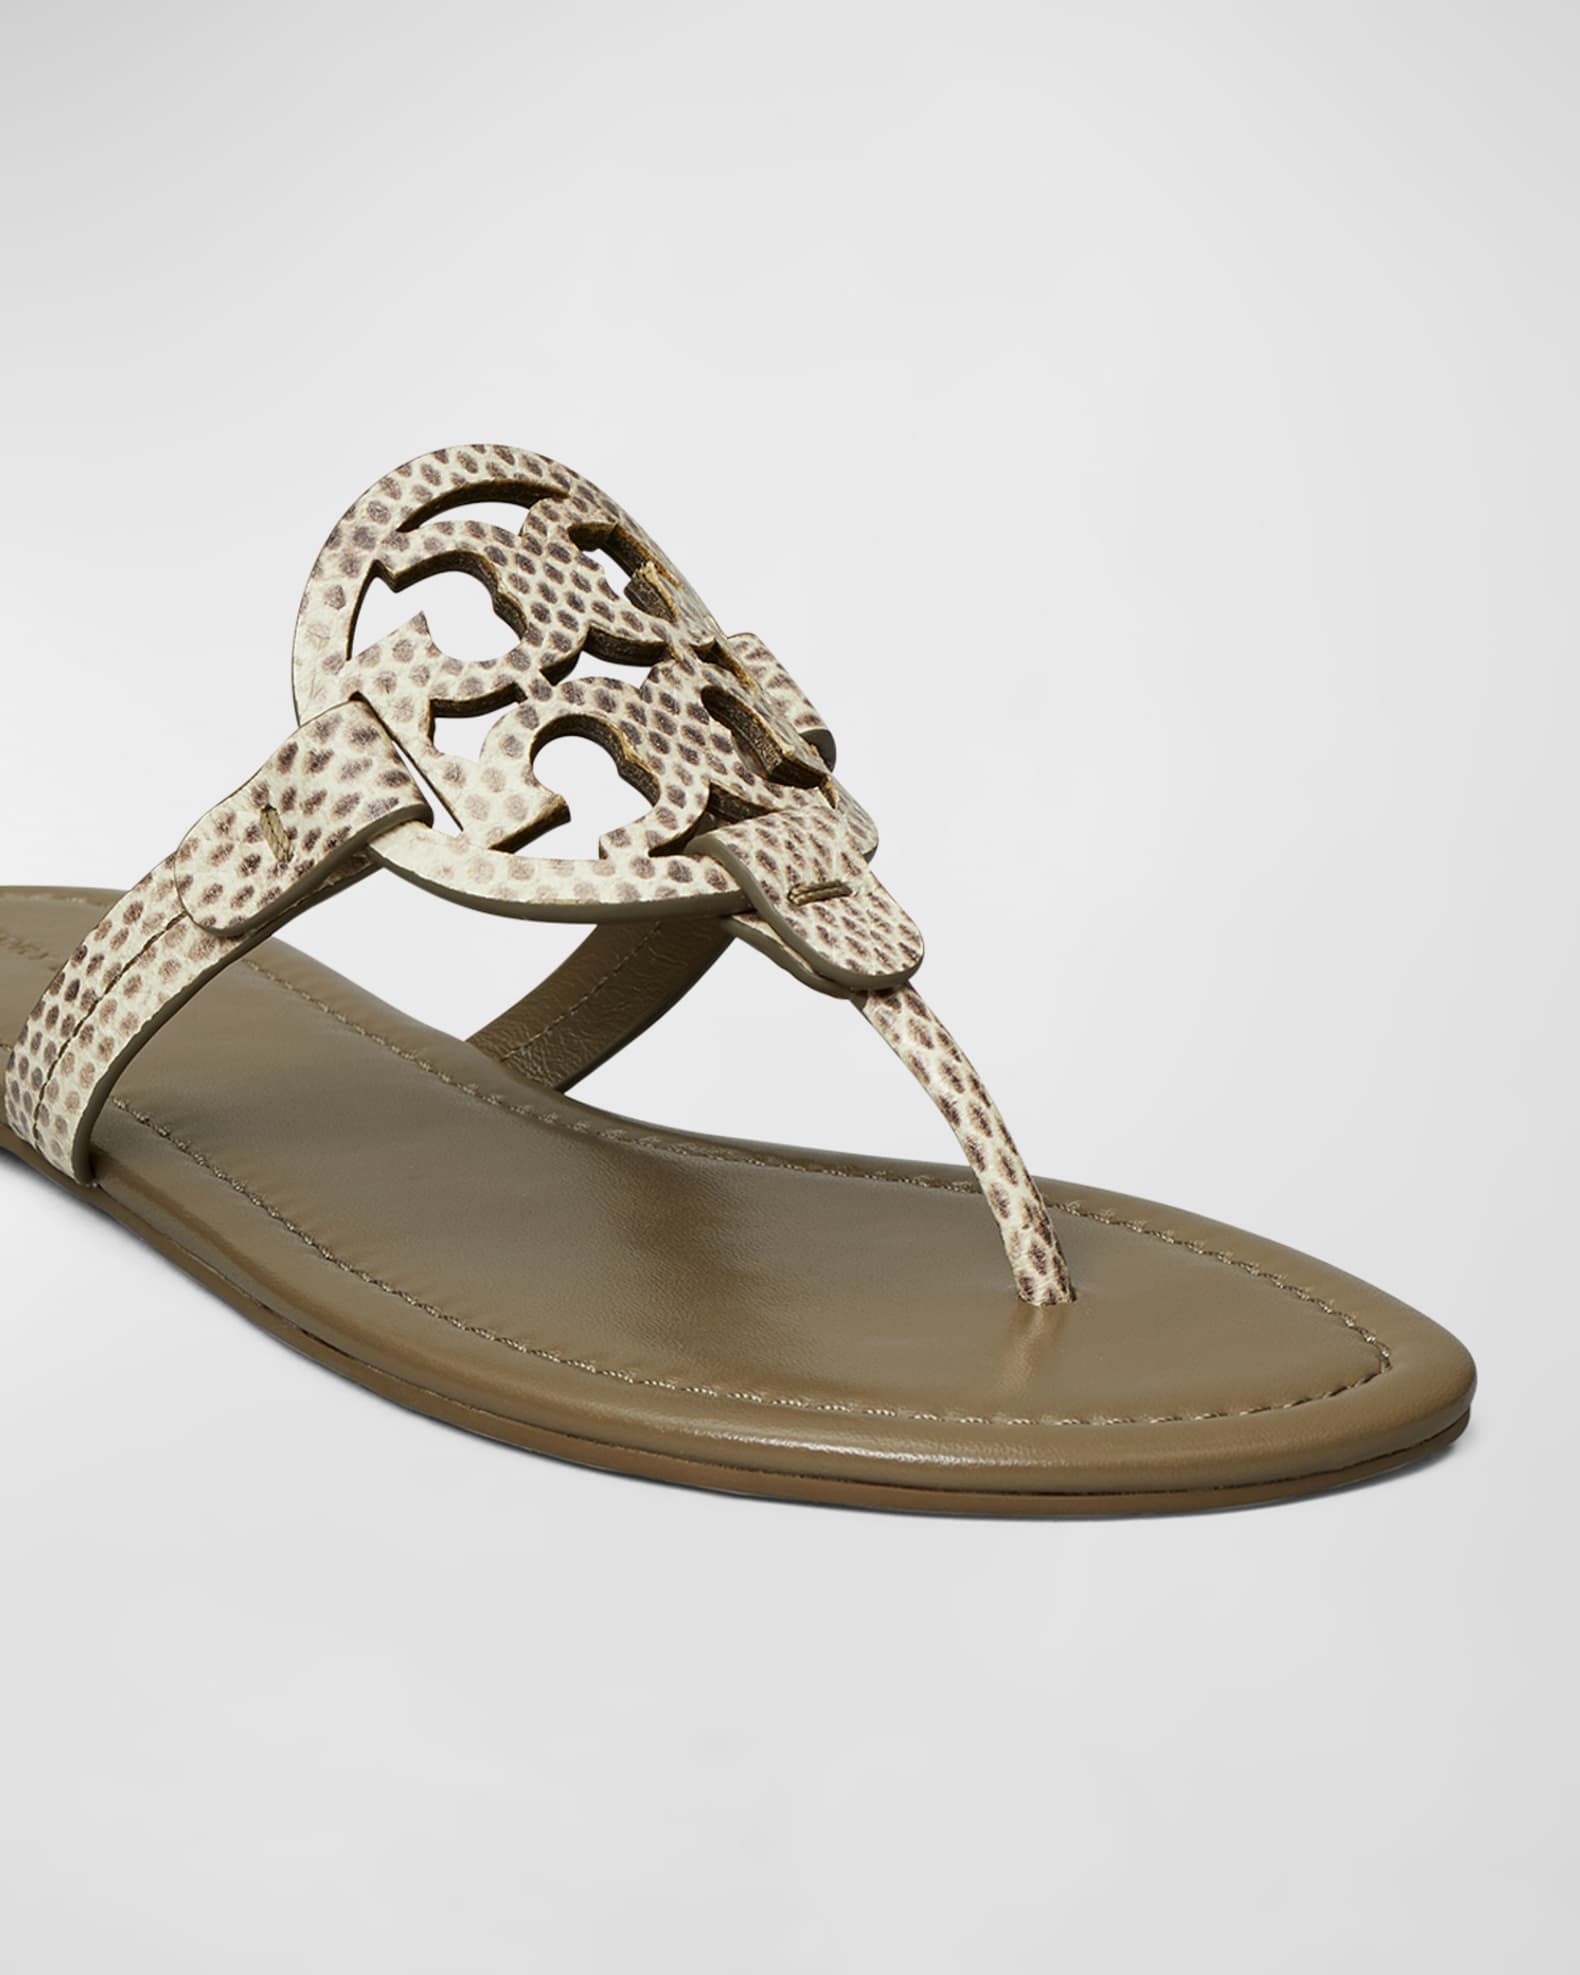 Tory Burch Miller Embossed Medallion Flat Thong Sandals | Neiman Marcus